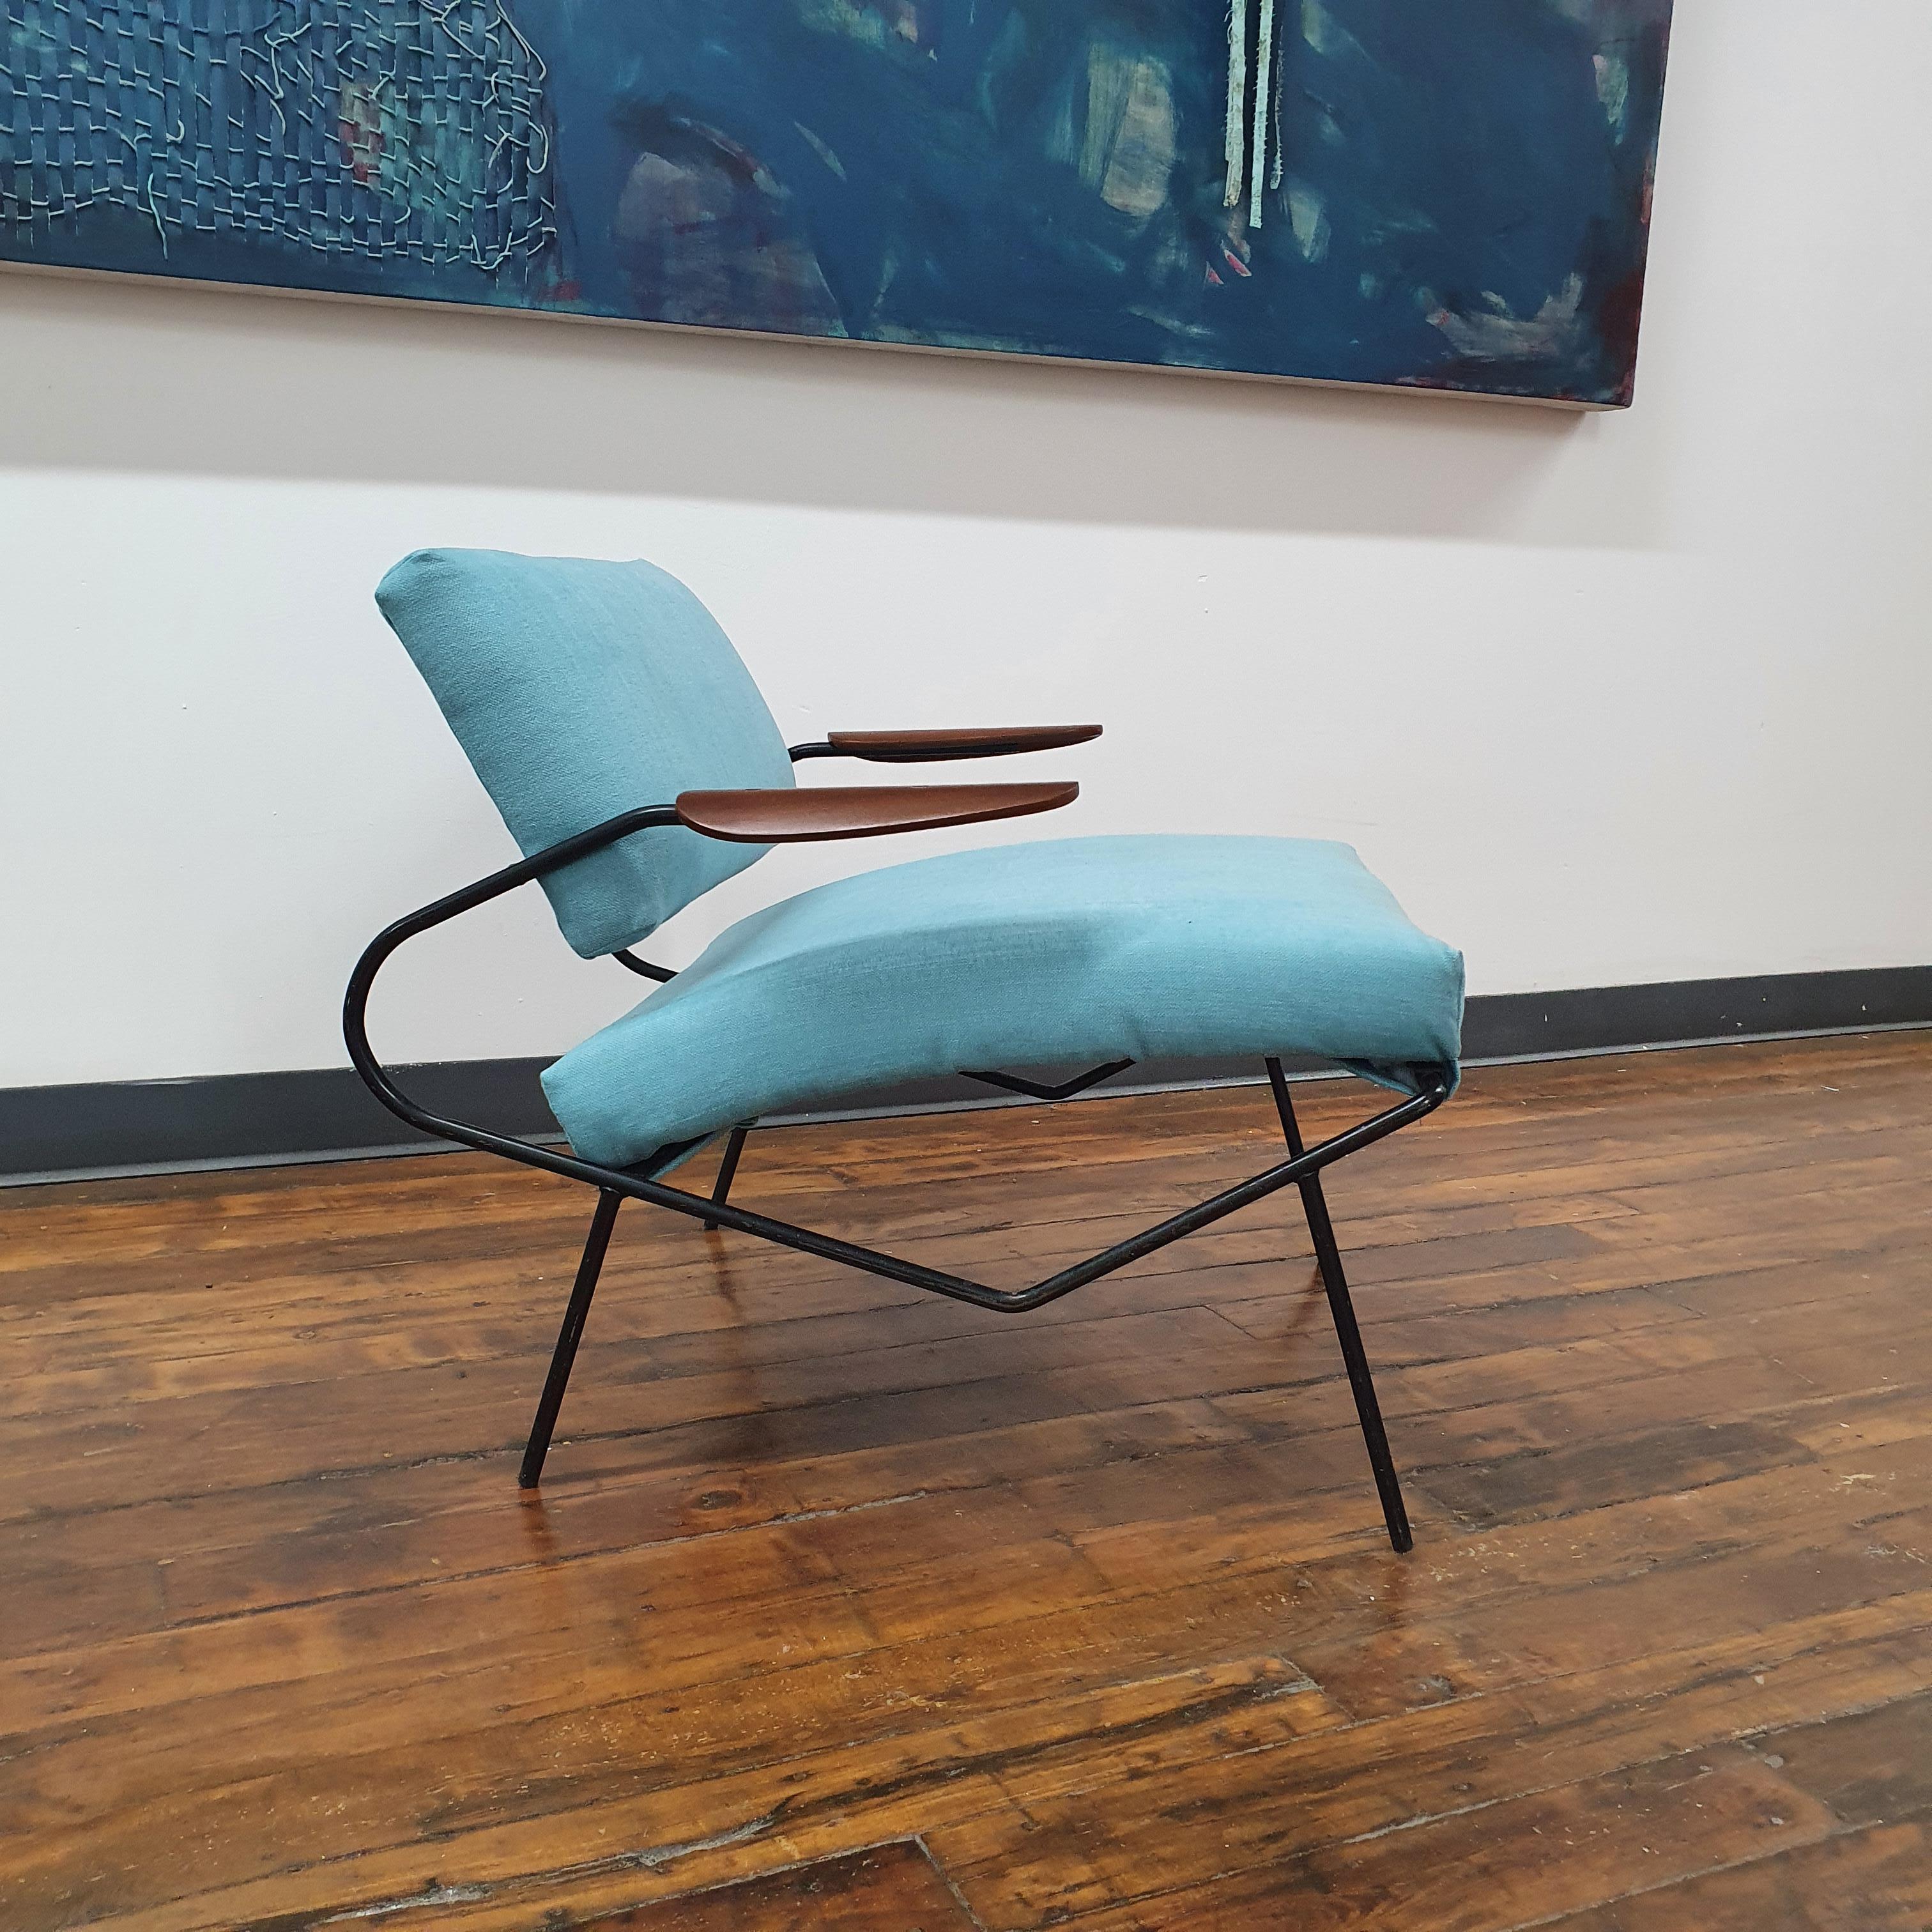 The Iron Lounge Chair with Walnut Armrests by Dan Johnson is a beautiful and unique piece of furniture that combines industrial materials with warm, natural wood. The chair has a sleek and modern design that emphasizes the beauty of the materials